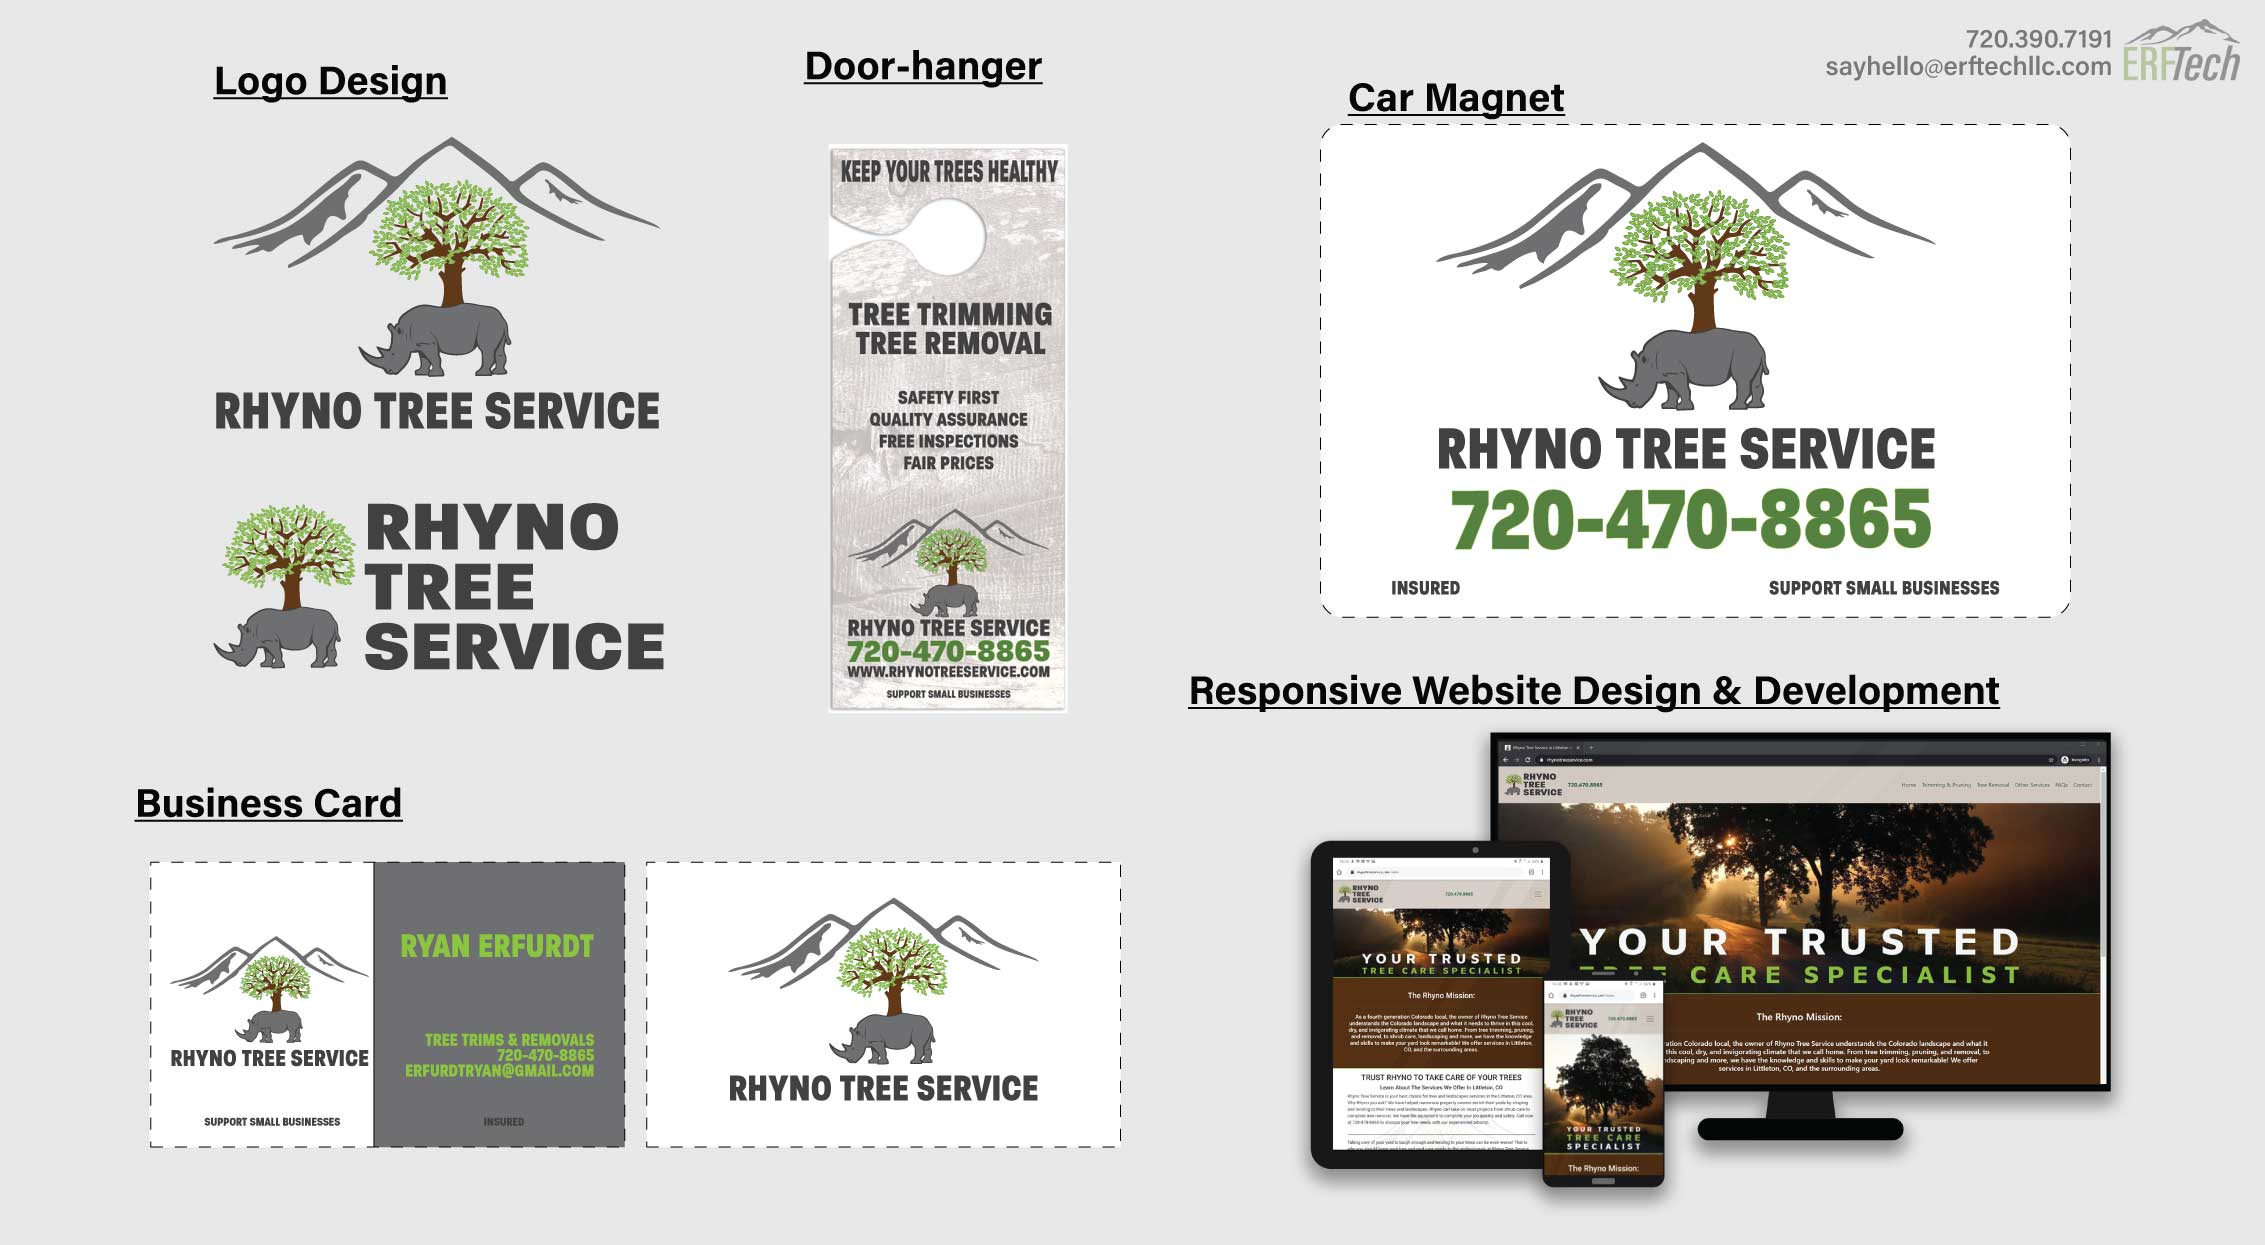 Full-Service Marketing for Rhyno Tree Service in Littleton, CO